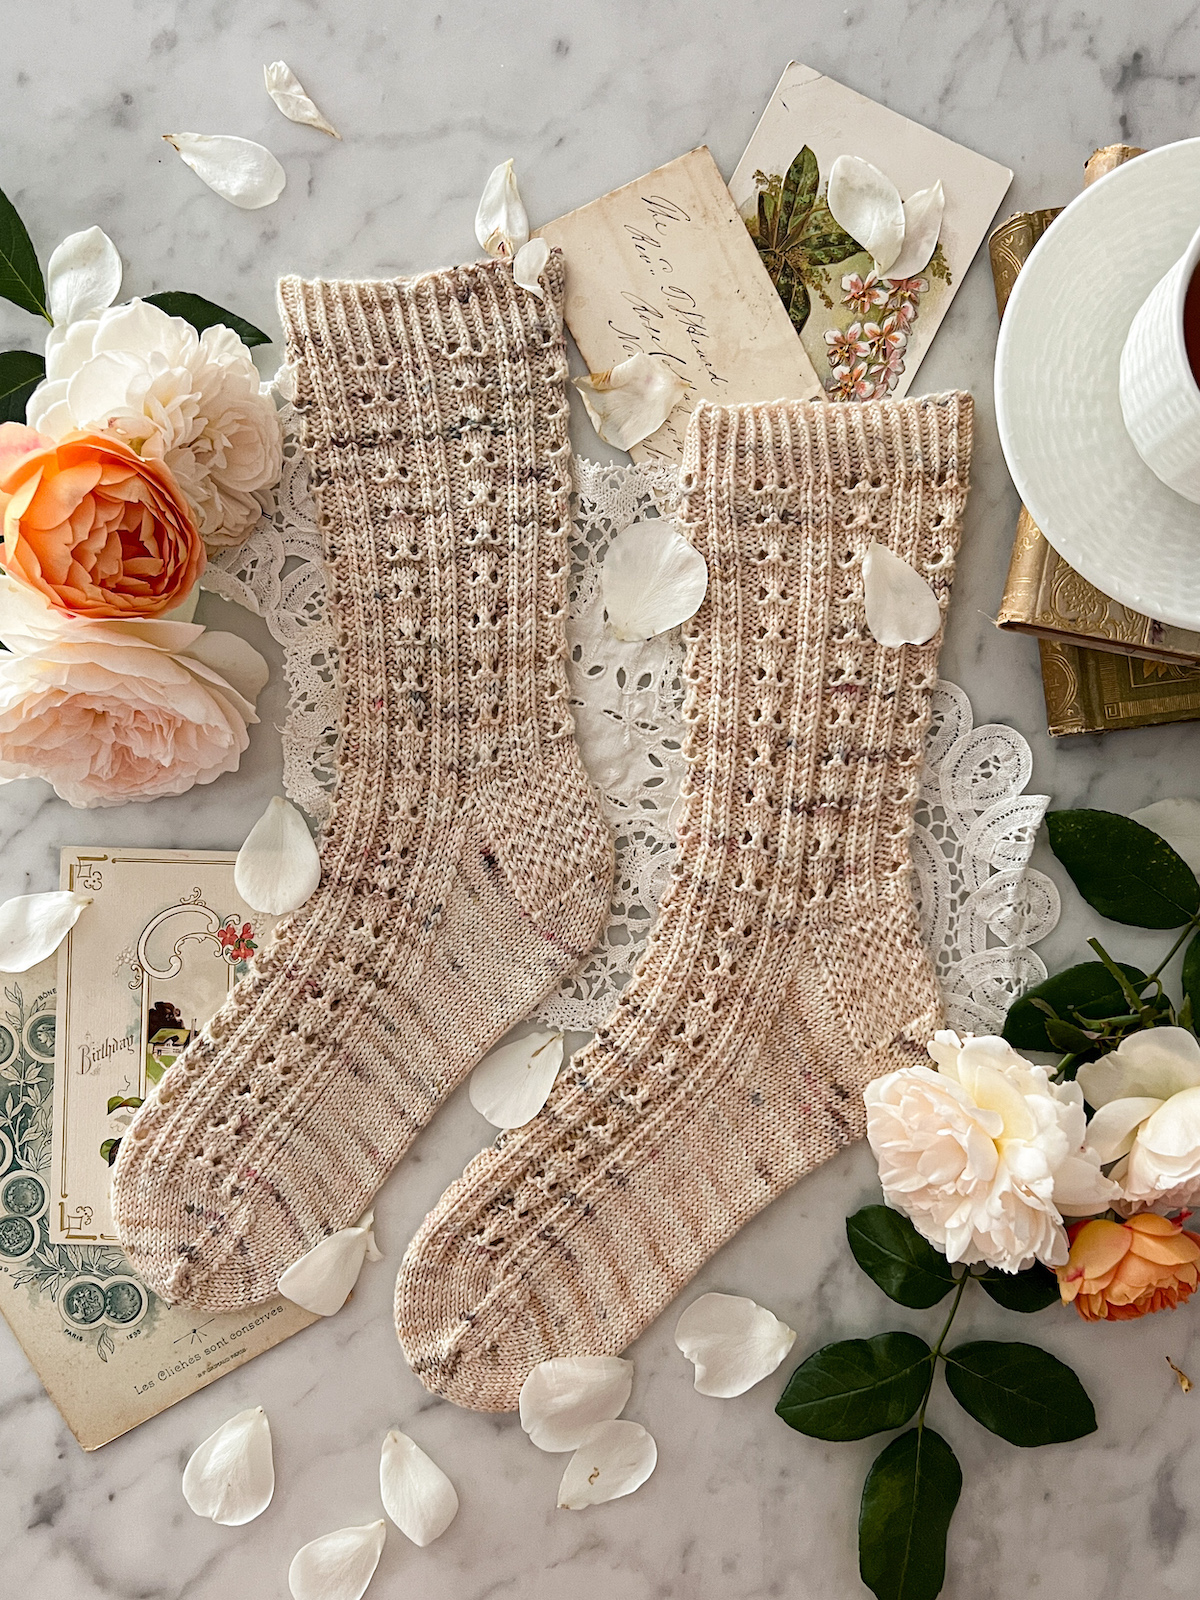 A pair of lightly speckled, pale pink socks is laid flat on a white marble countertop. The socks have columns of eyelets and purl stitches. They're surrounded by roses and antique paper ephemera.